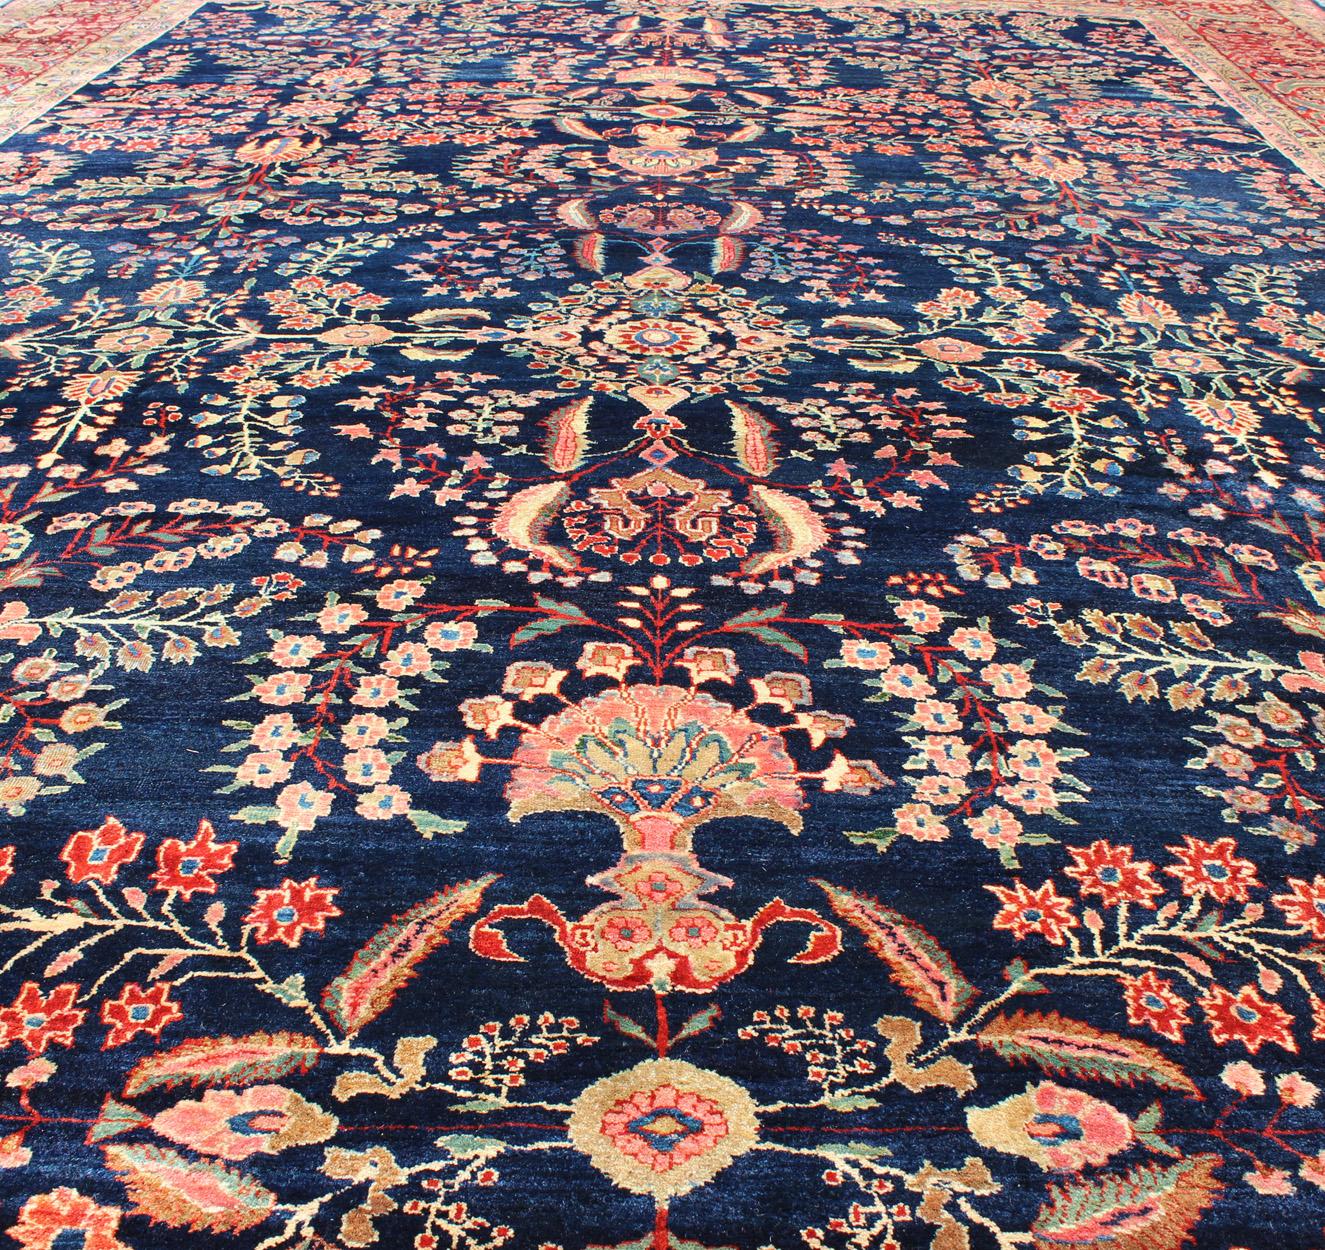 Antique Persian Finely Woven Sarouk Ferahan Rug with Intricate Details 1